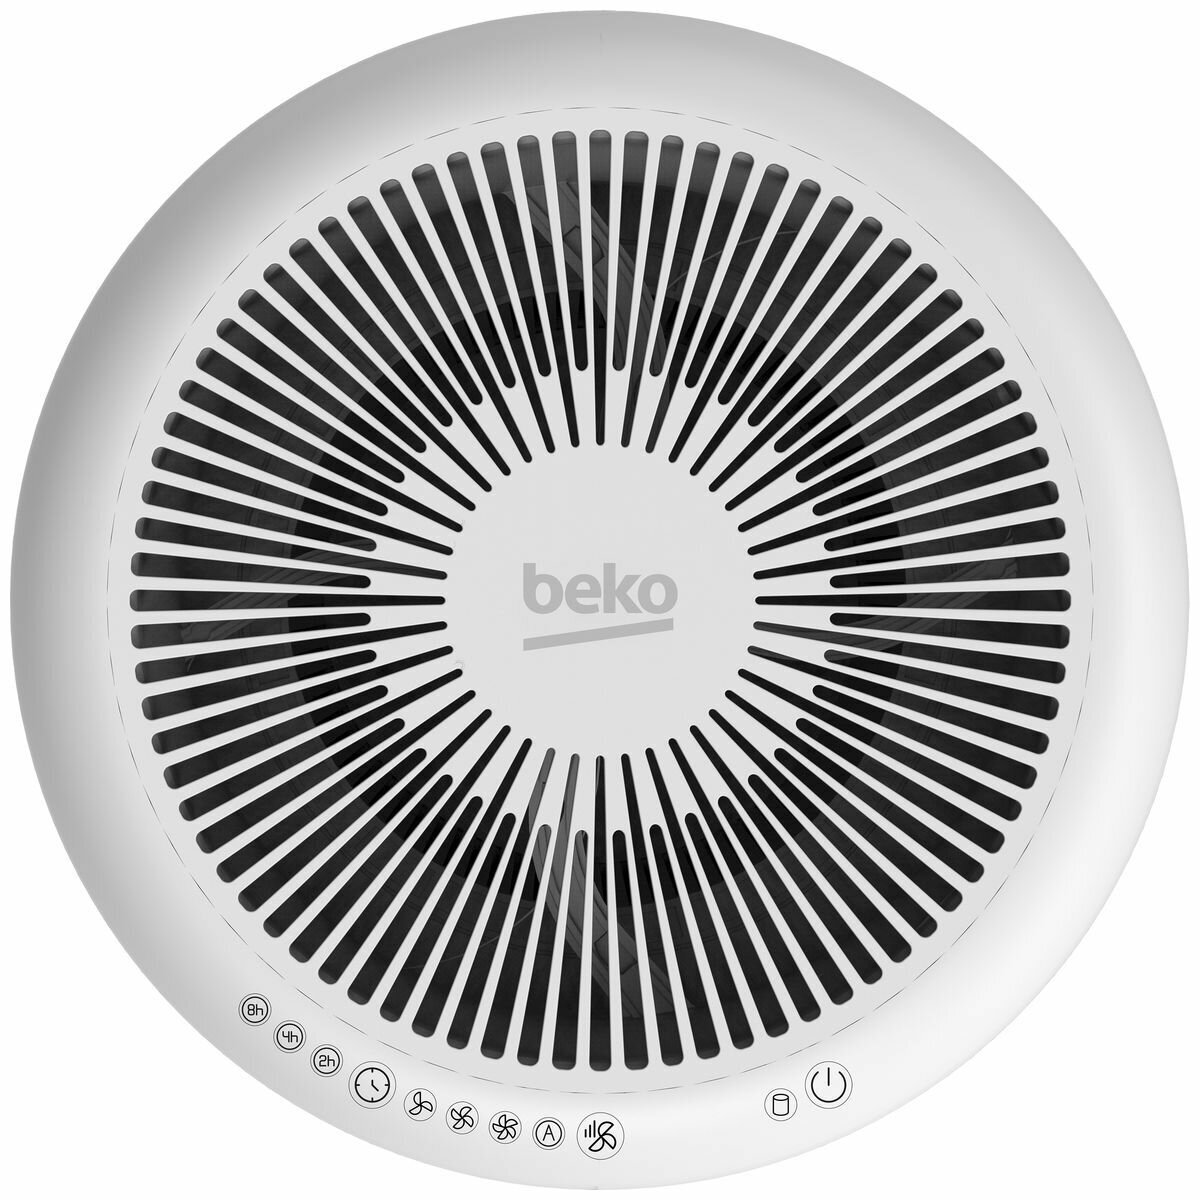 Beko Air Purifier with 3 Stage HEPA Filter ATP6100I hero image